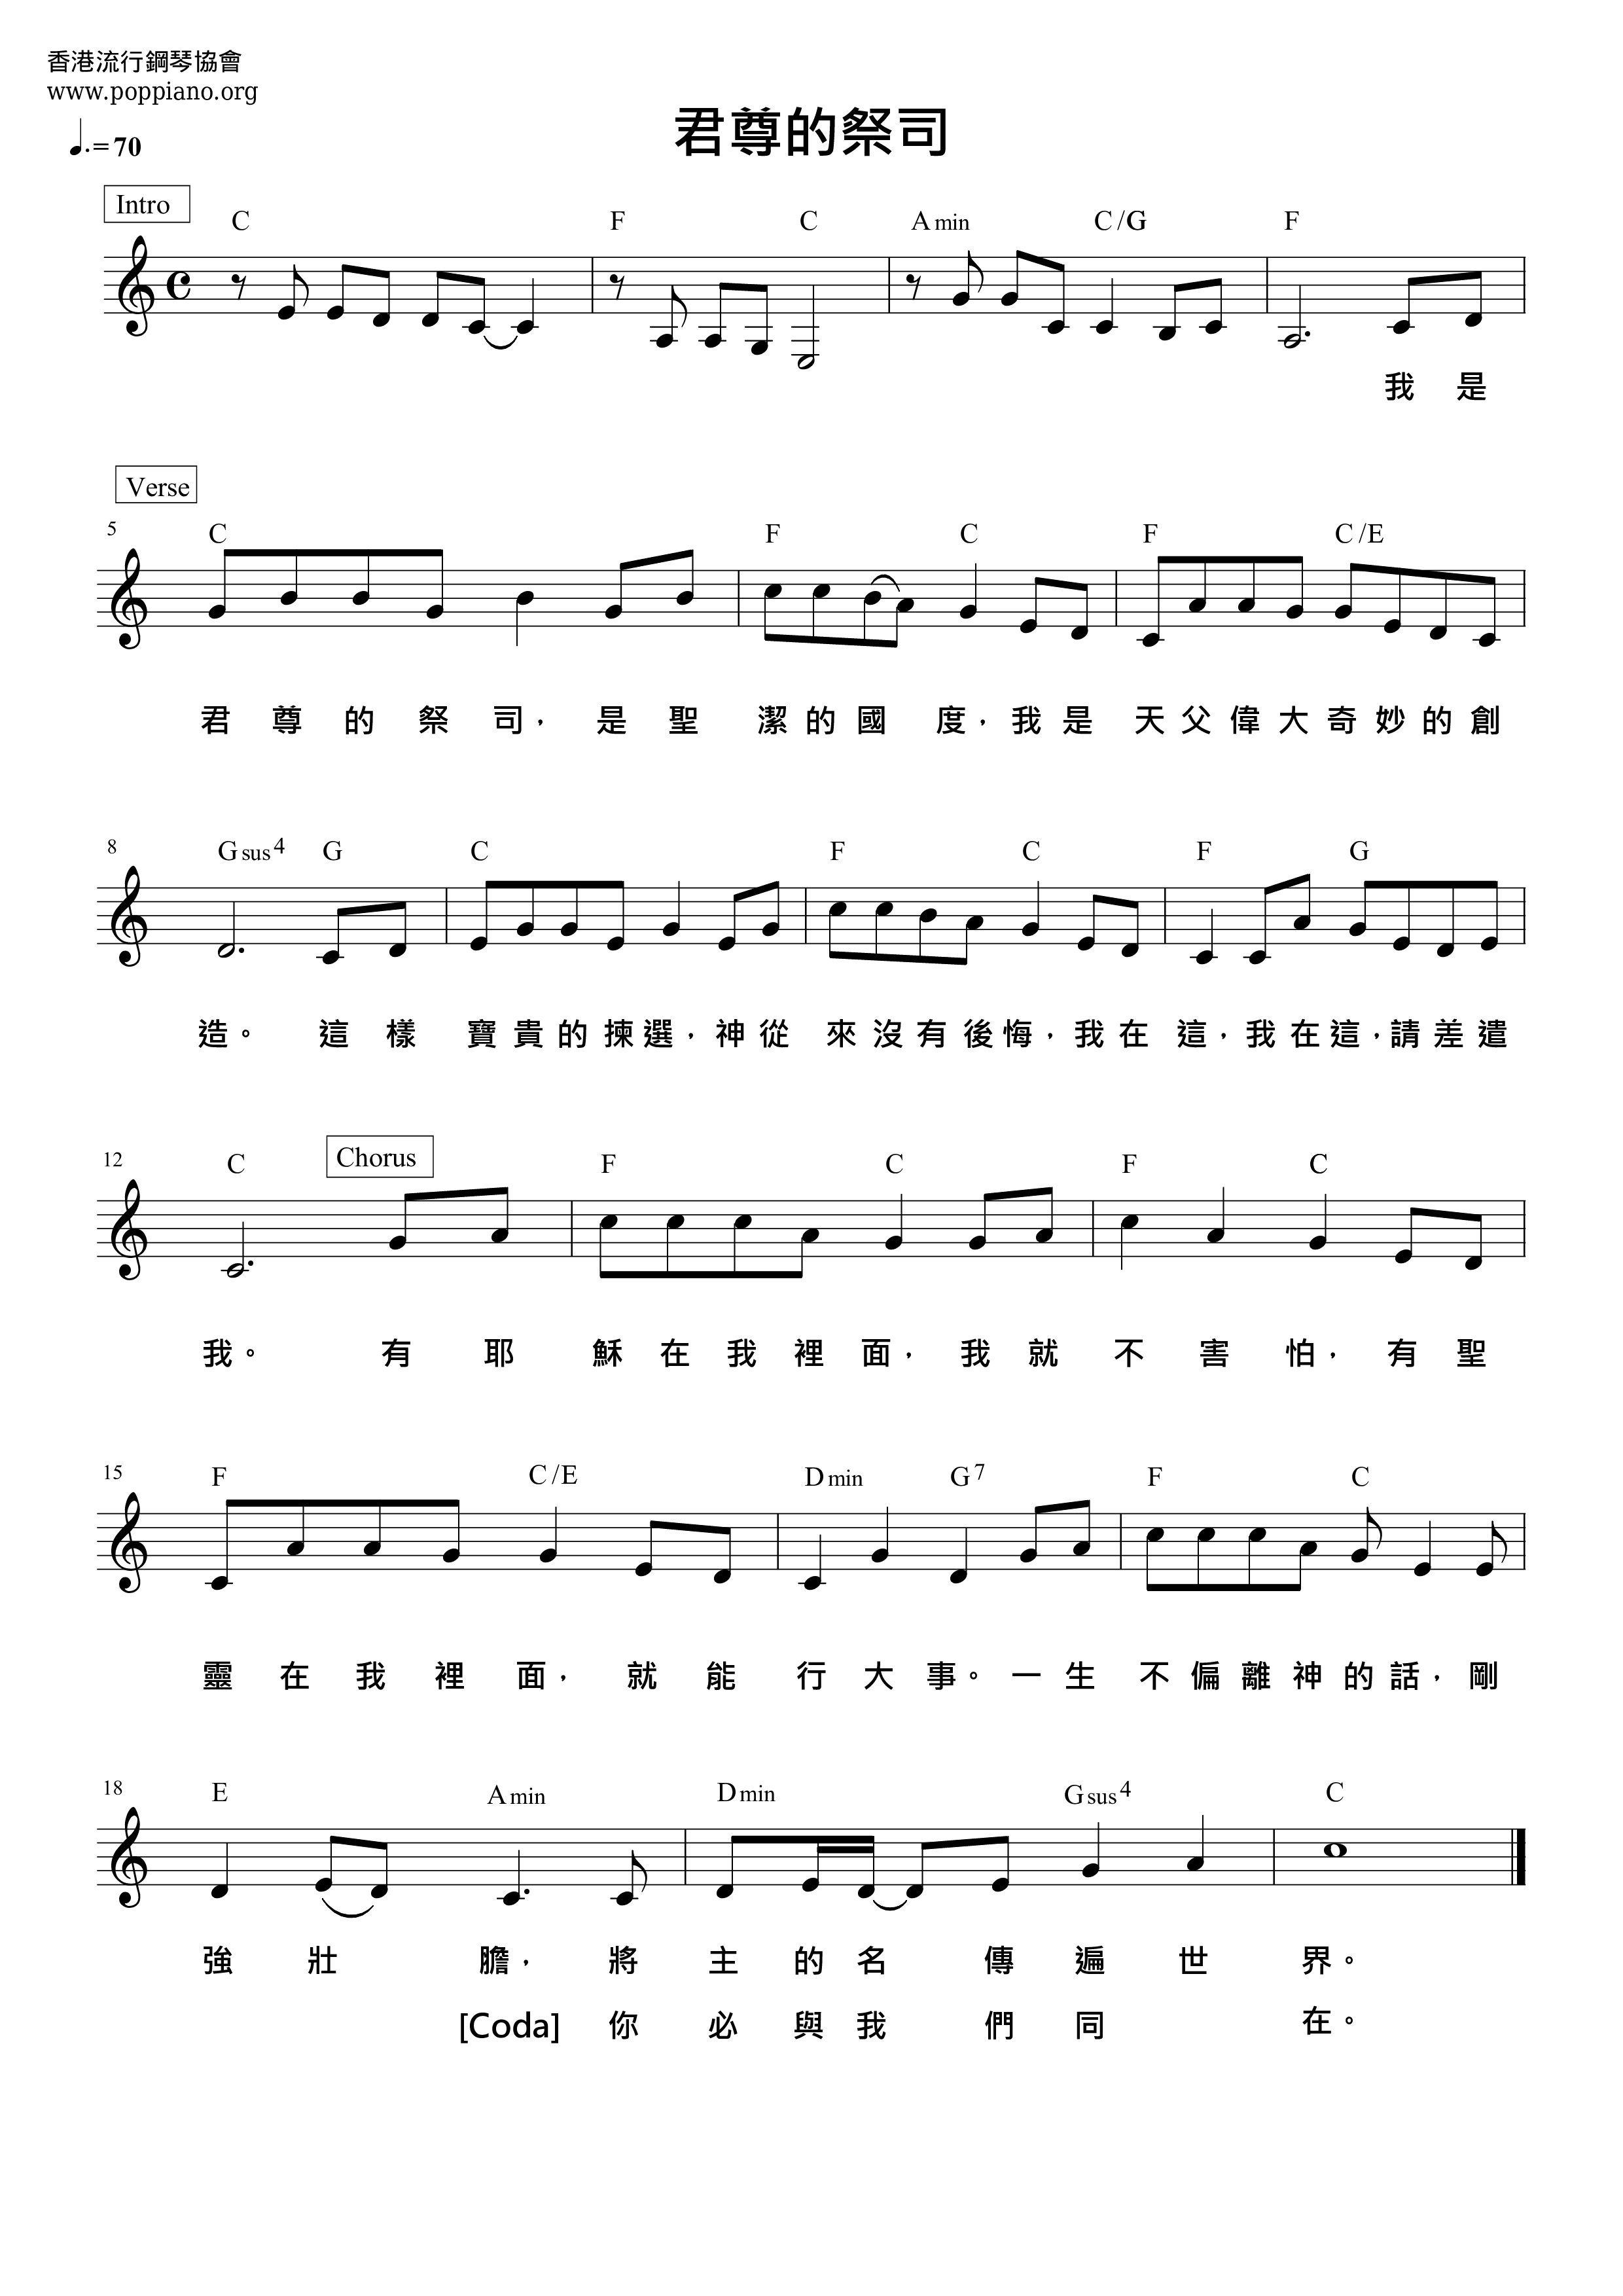 The Priest Of The King Score